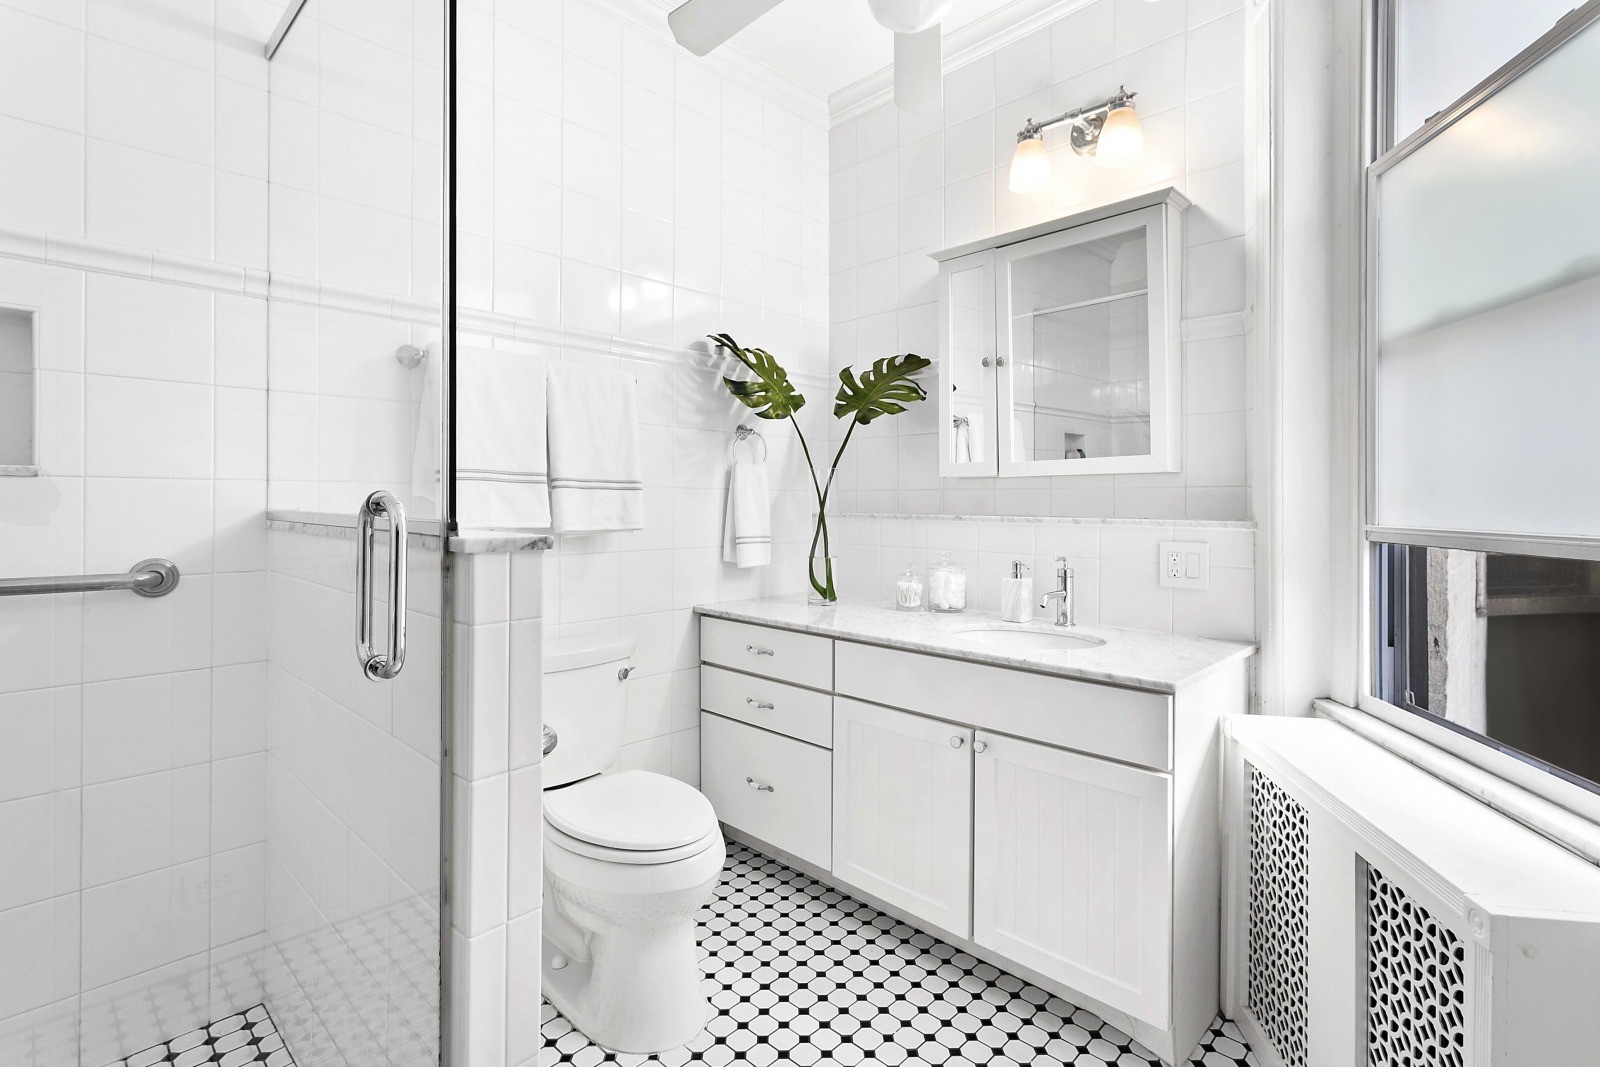 How To Organize A Small Bathroom